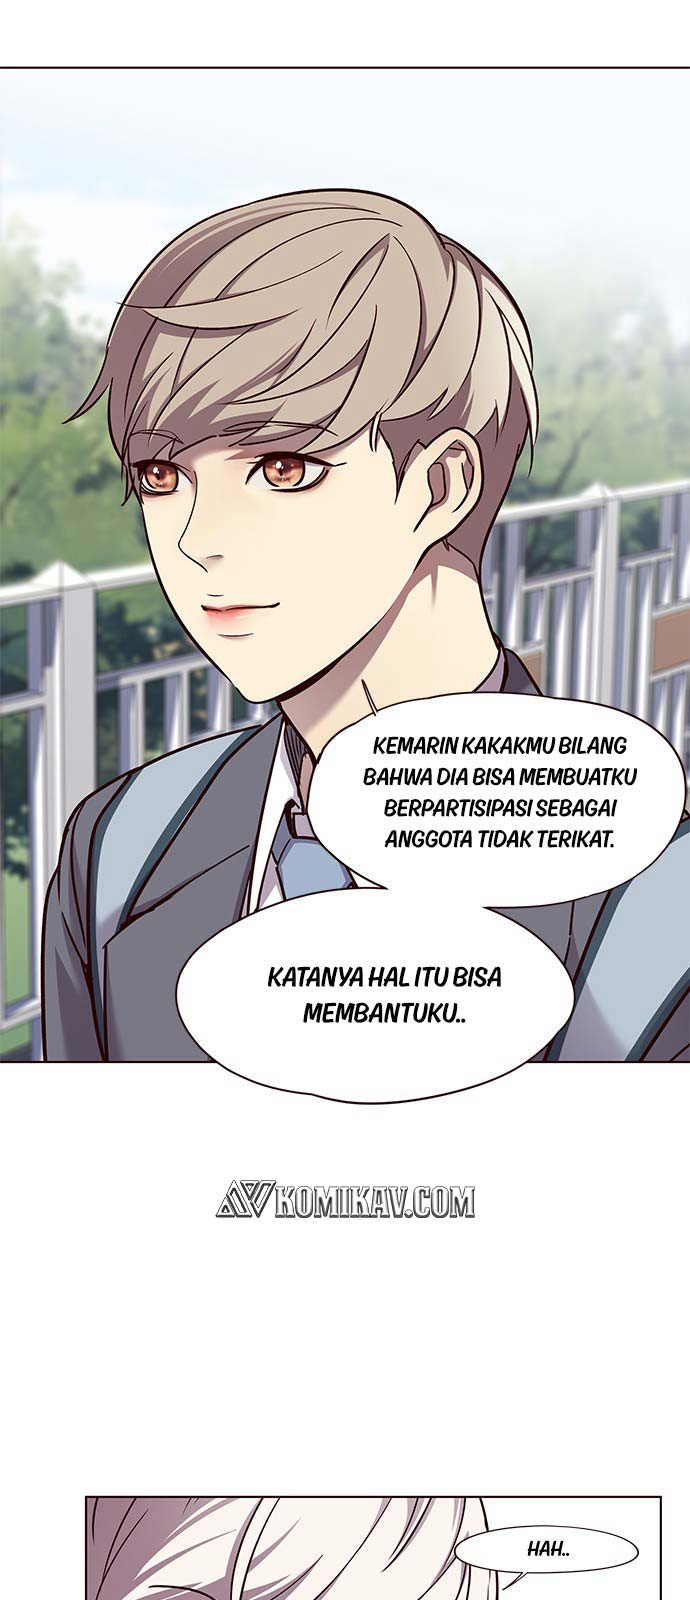 Eleceed Chapter 57